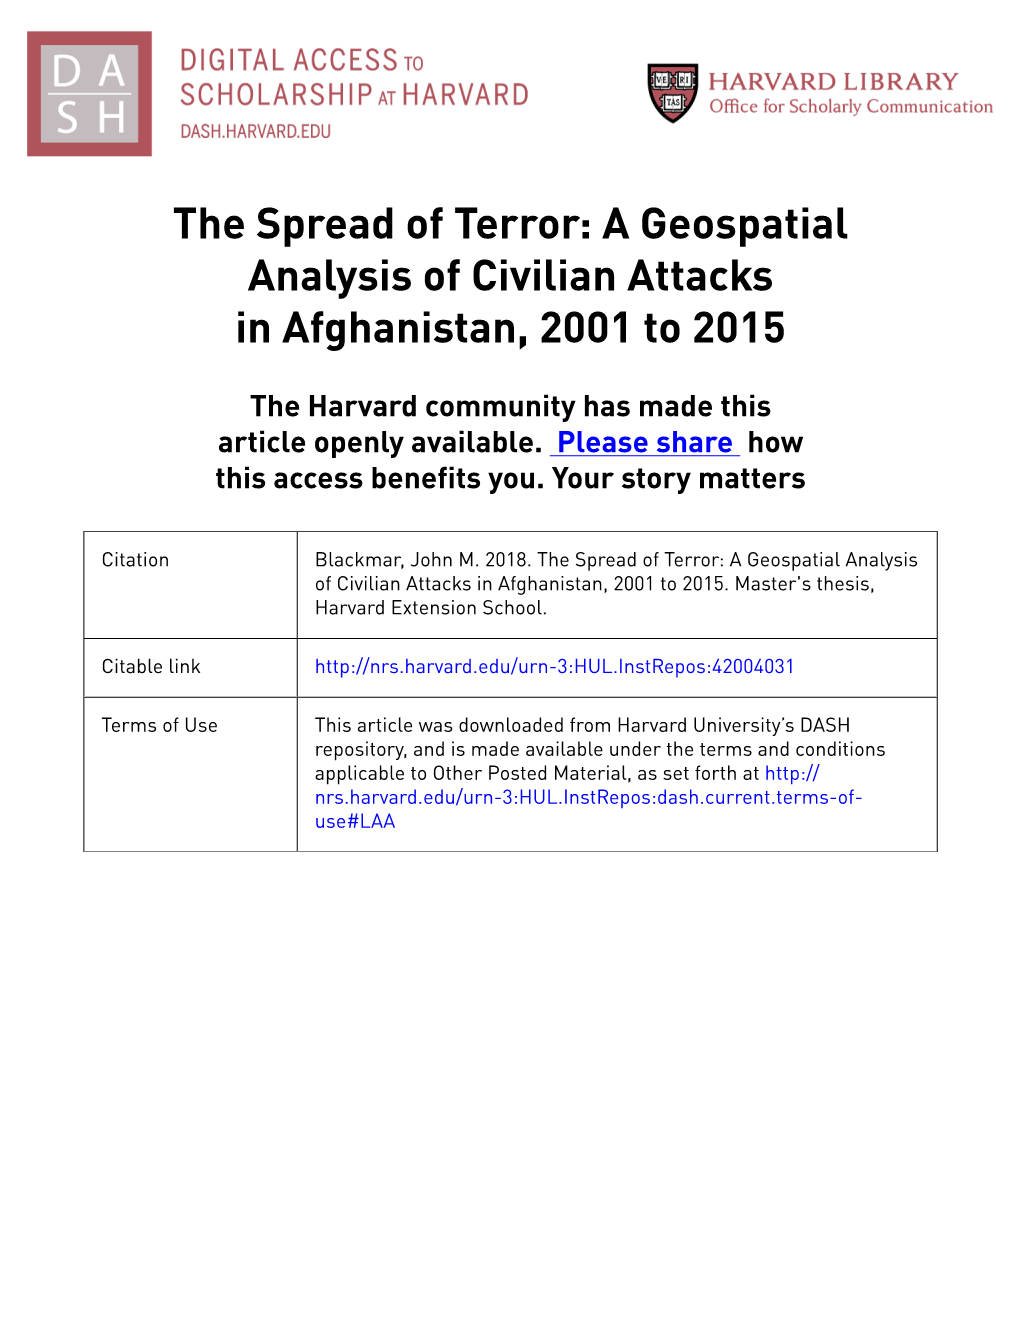 The Spread of Terror: a Geospatial Analysis of Civilian Attacks in Afghanistan, 2001 to 2015